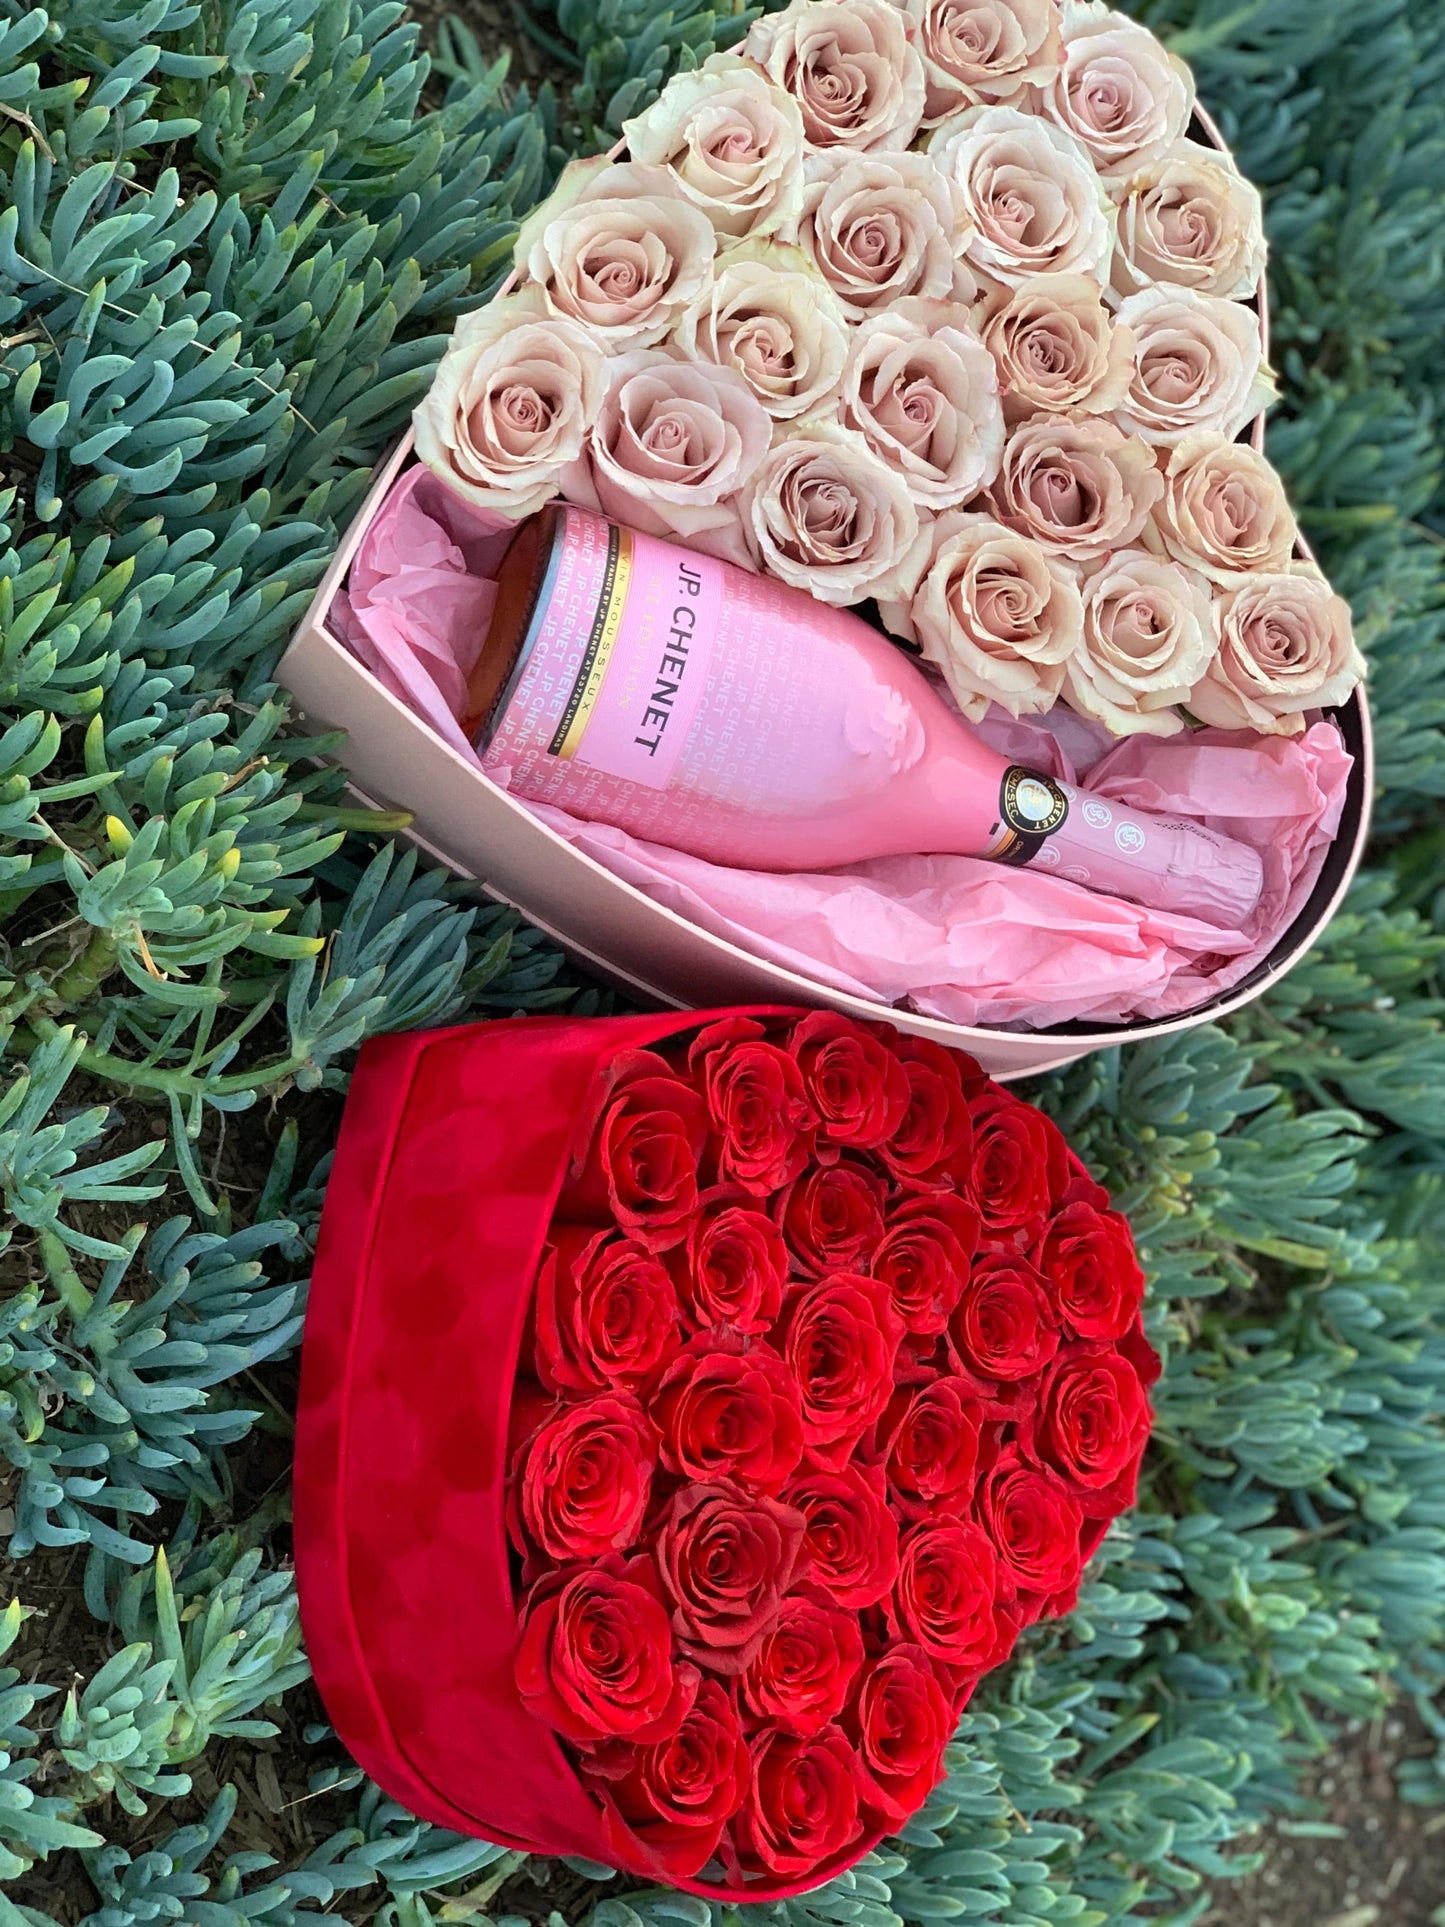 Gift box N.1 Romantic box with tender Quicksand roses and a bottle of rose J.P.  Chenet